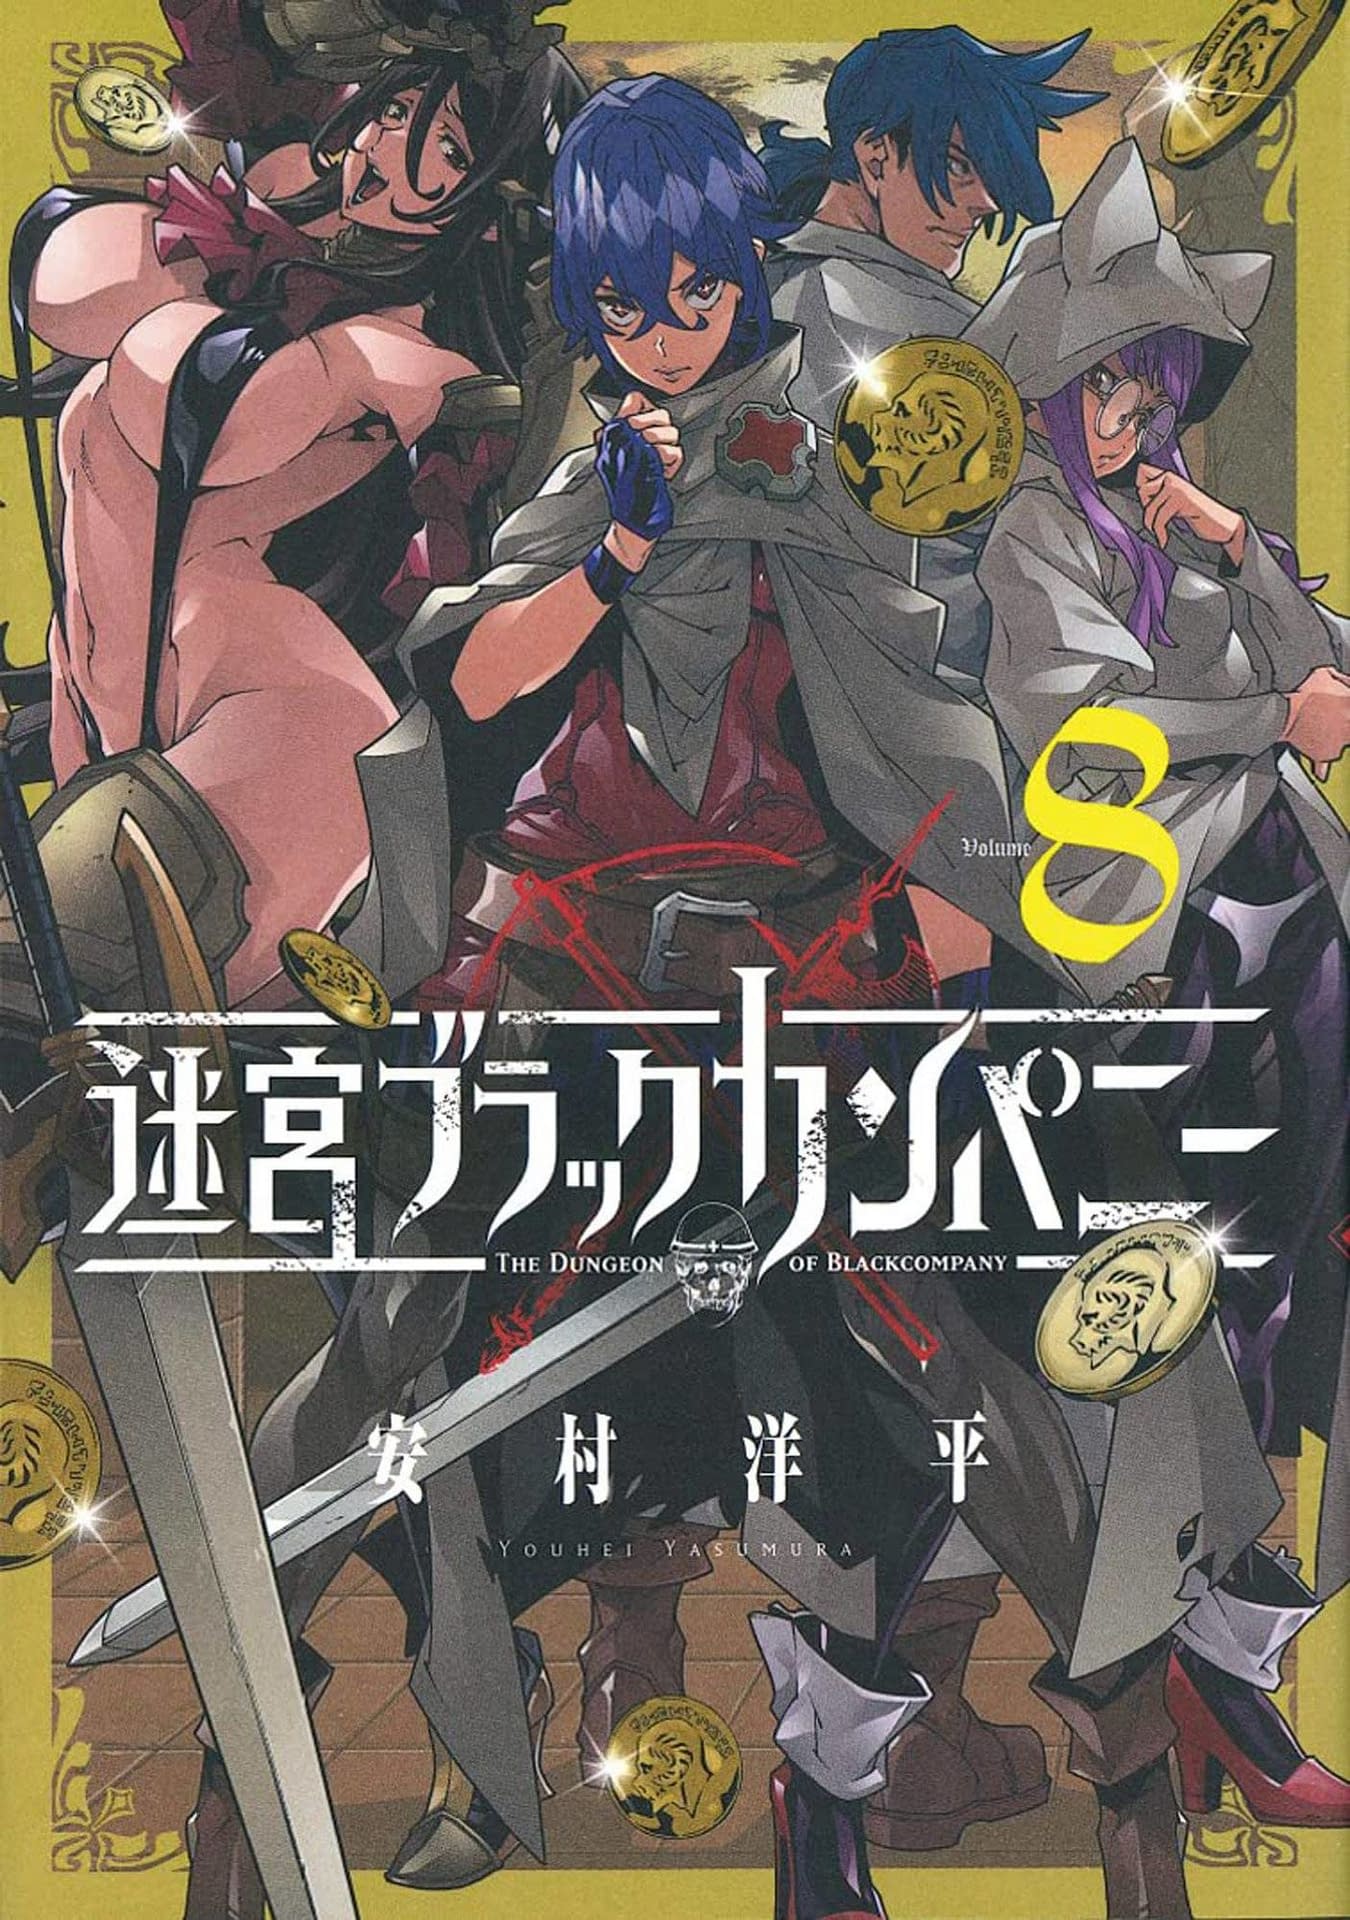 Meikyuu Black Company Chapter 12 Discussion - Forums 